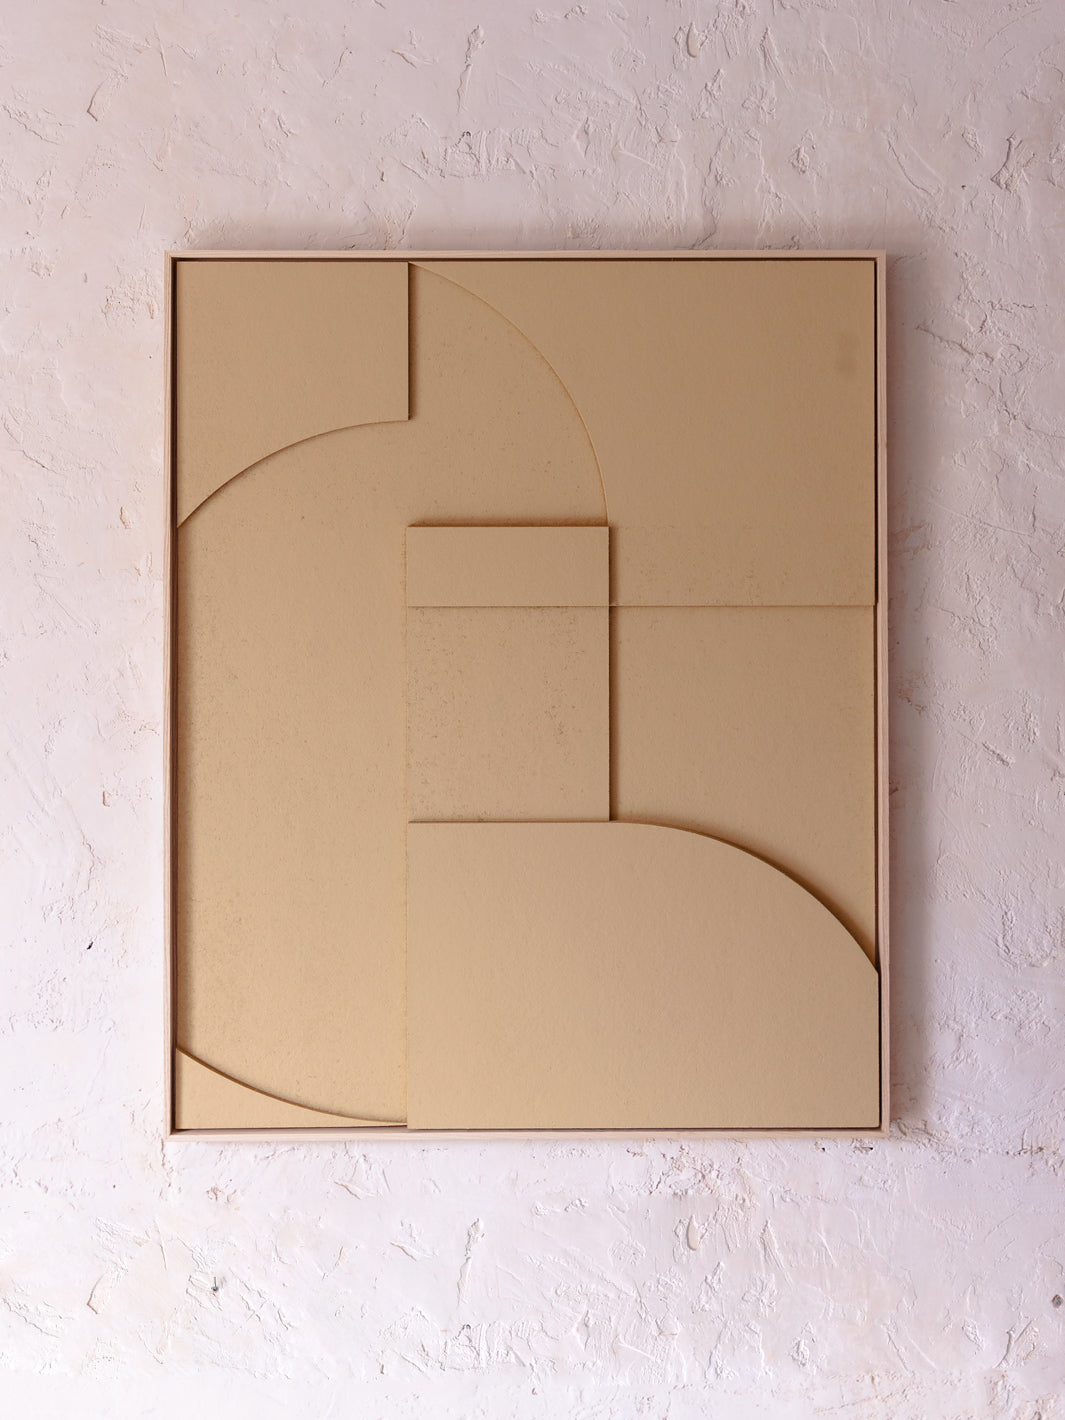 Framed geometric relief geometric picture sand "A" XL 100x123cm